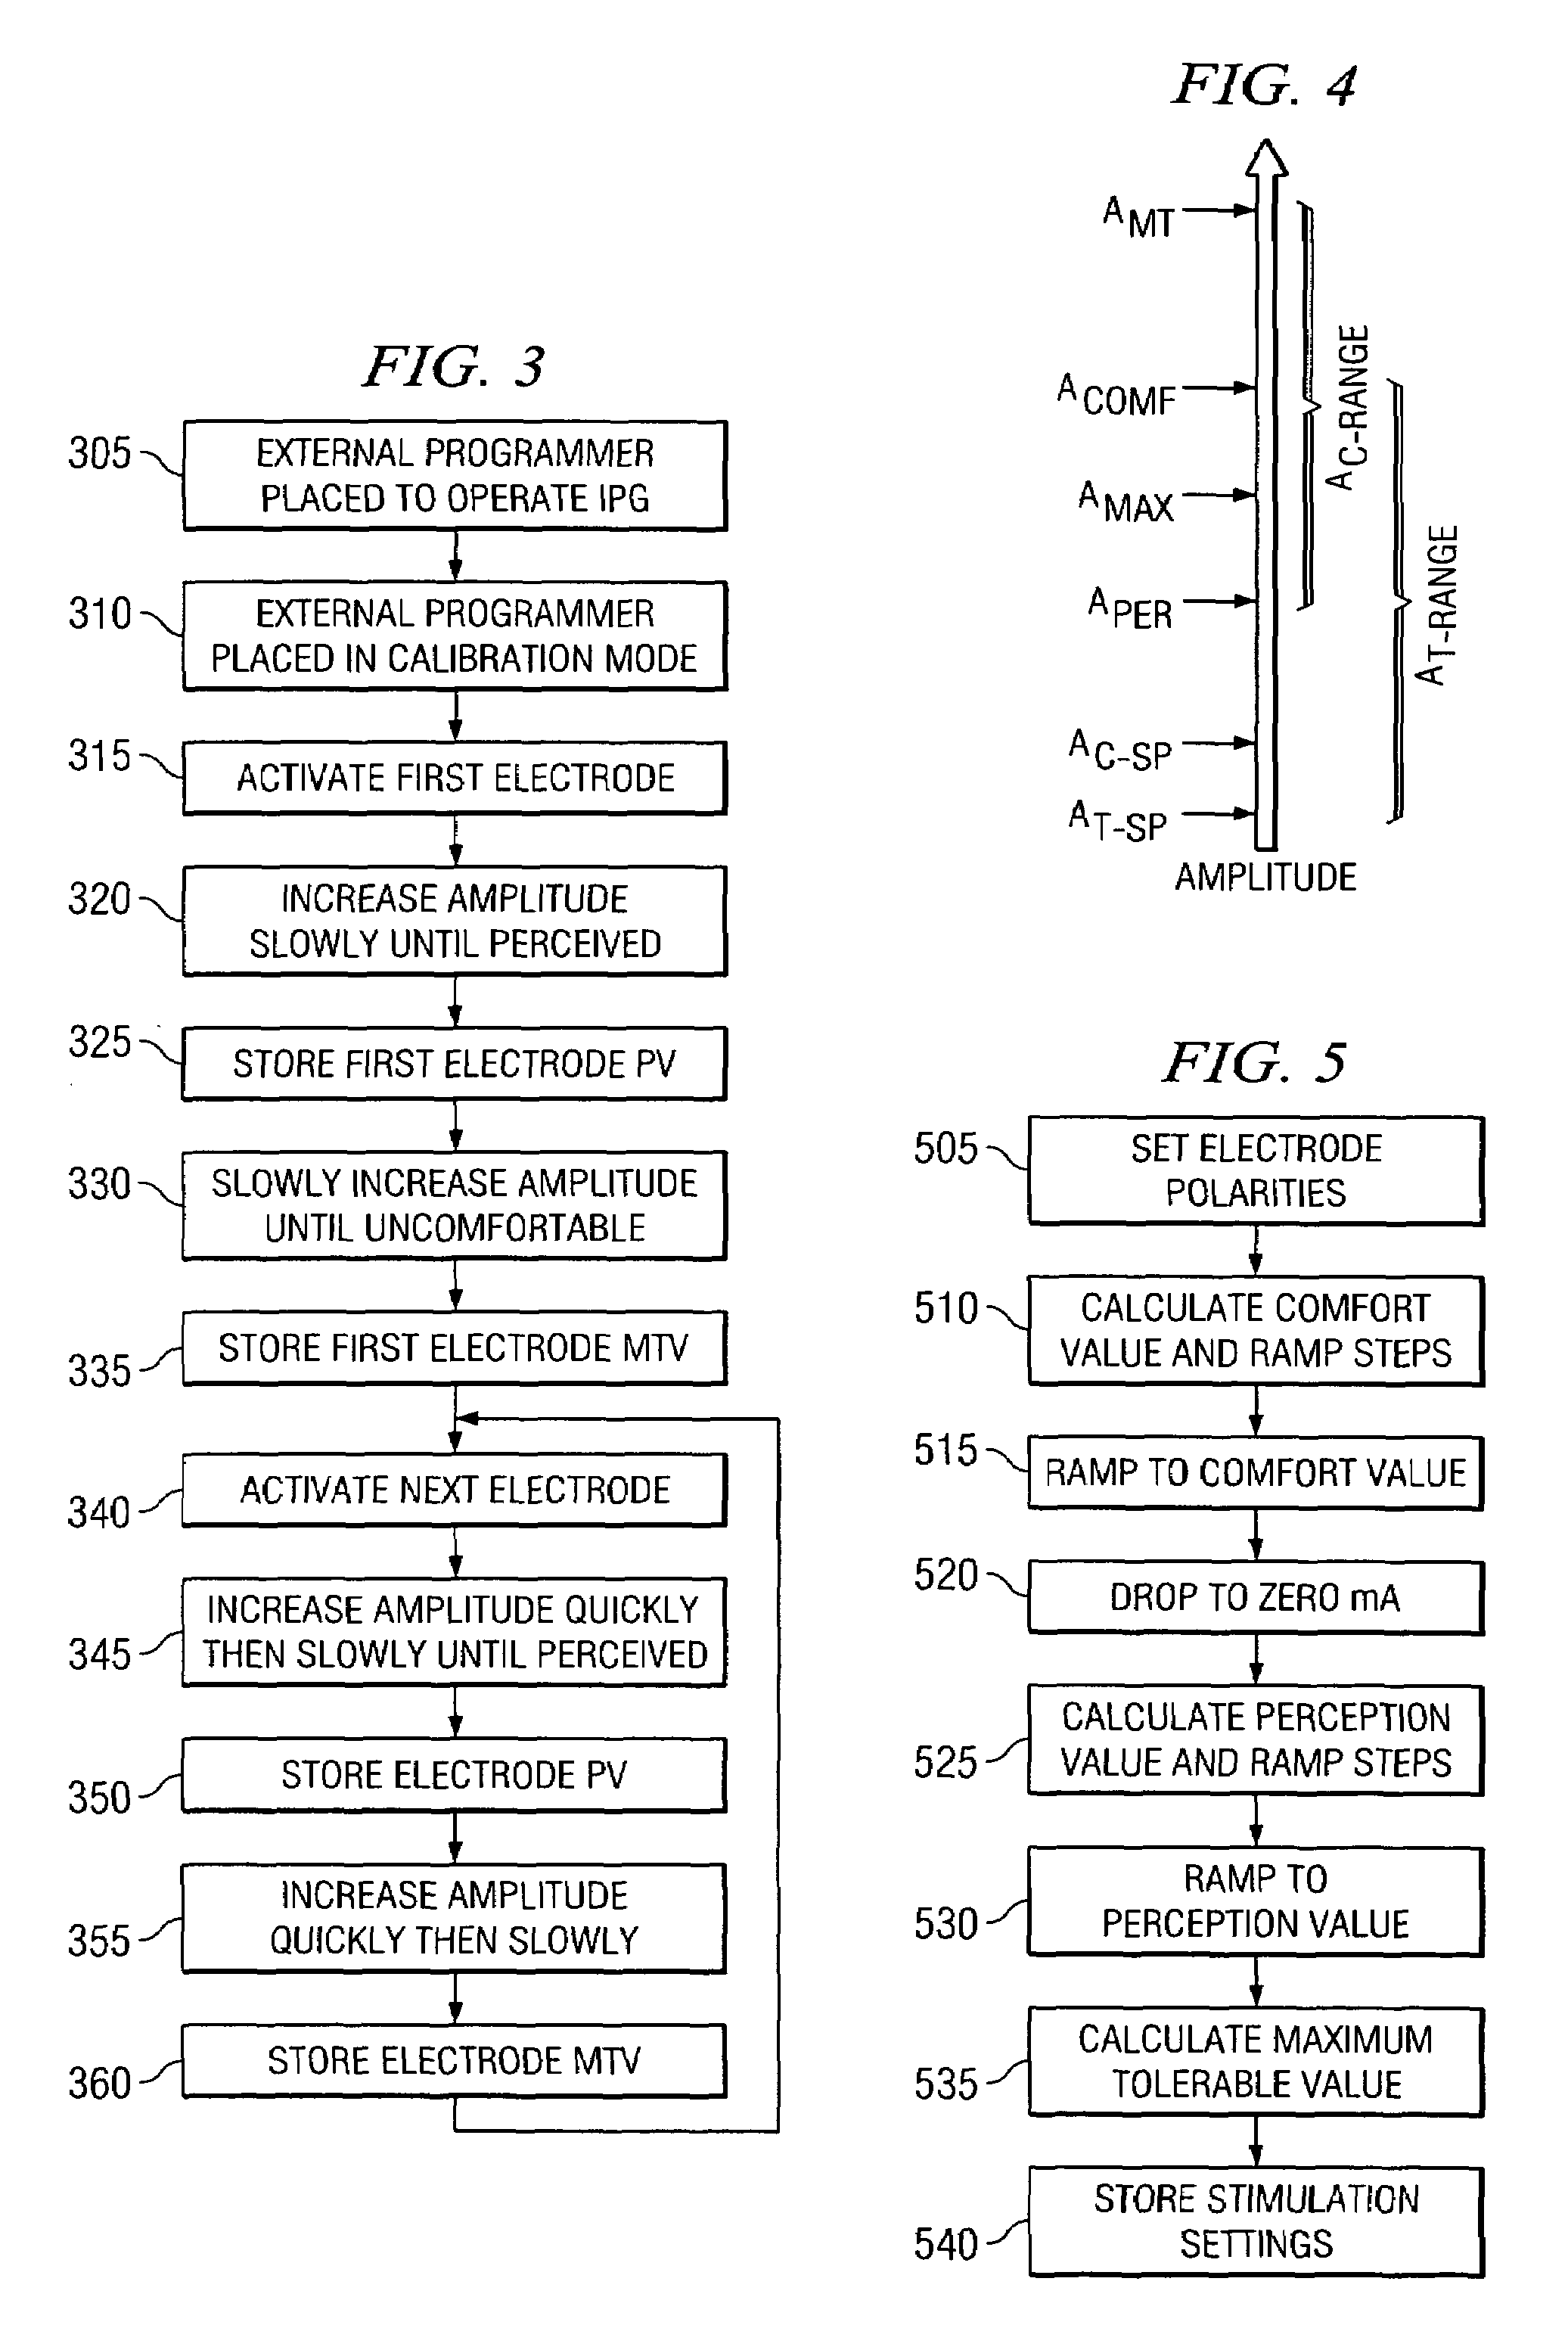 System and method for stimulus calibration for an implantable pulse generator